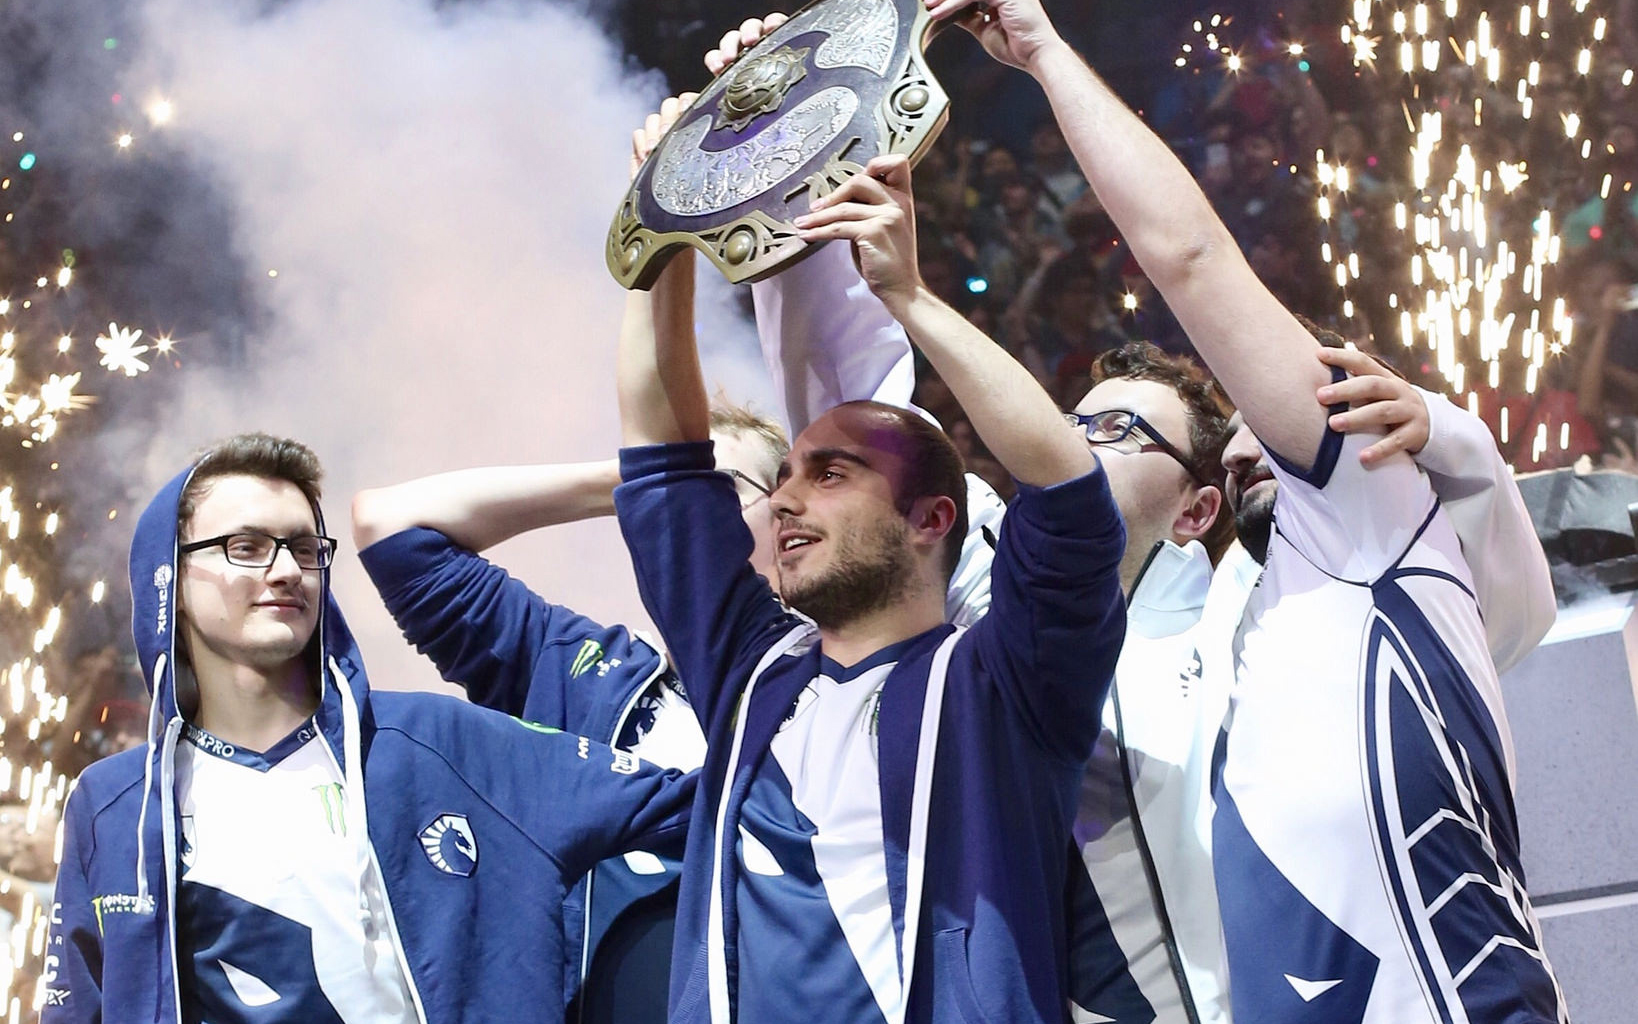 How Team Liquid swept The International 2017 Grand Finals for the 10